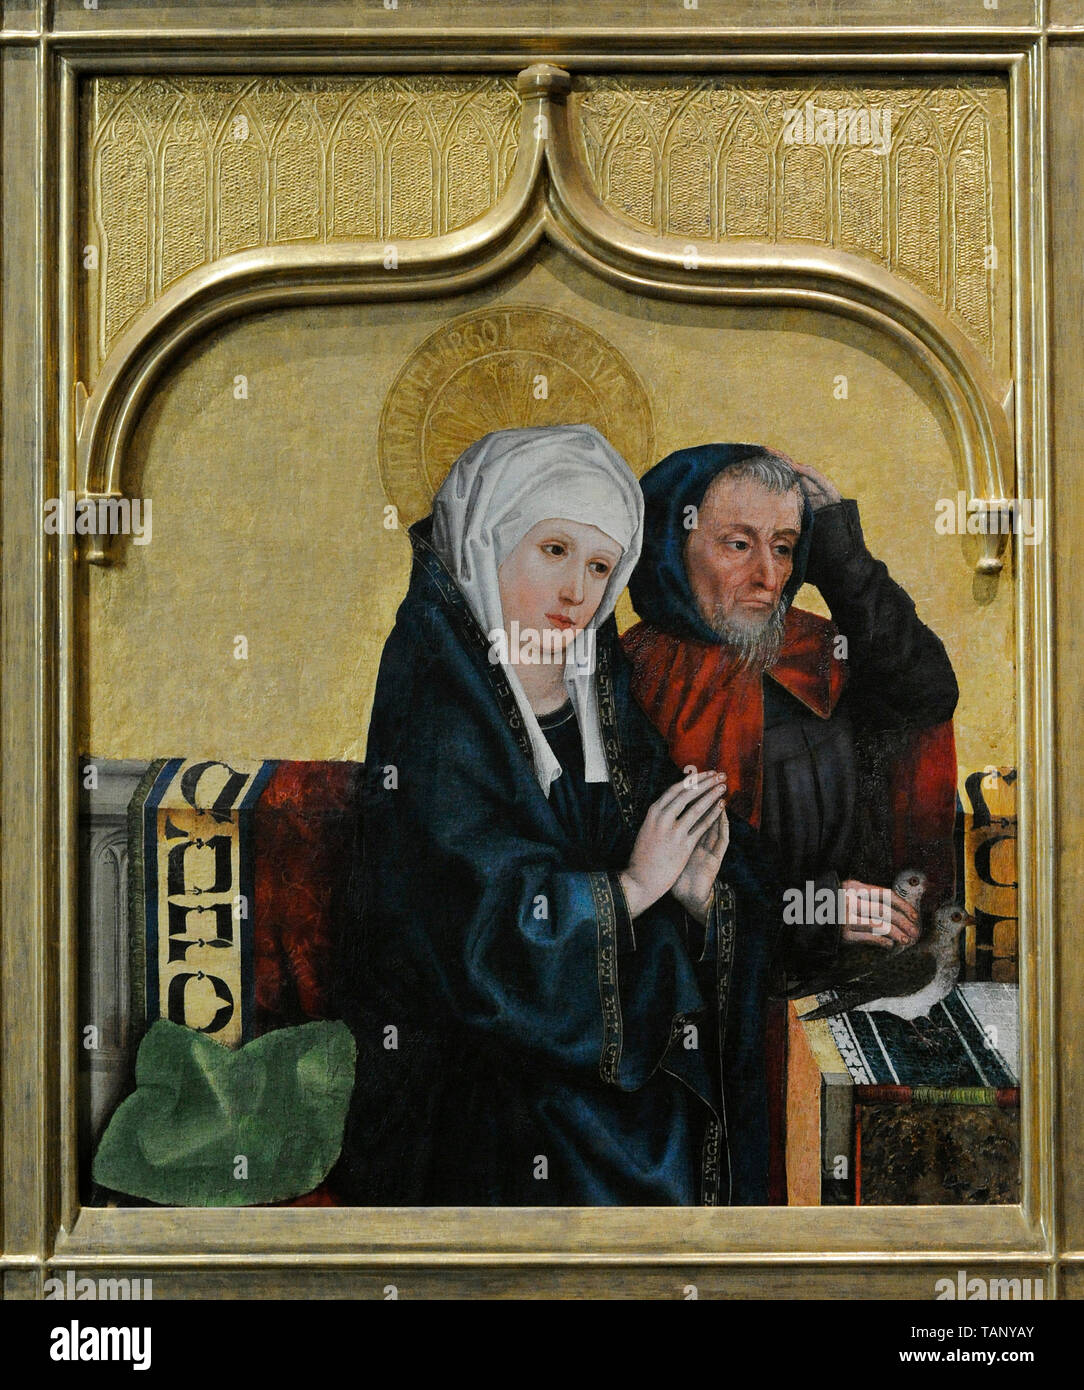 Hans Pleydenwurff (active in Nuremberg, ca.1457-1472). German painter. Presentation in the Temple, Fragment of panel of an altarpiece, 1462. From Saint Elizabeth Church, Wroclaw (Breslau). National Museum. Warsaw. Poland. Stock Photo